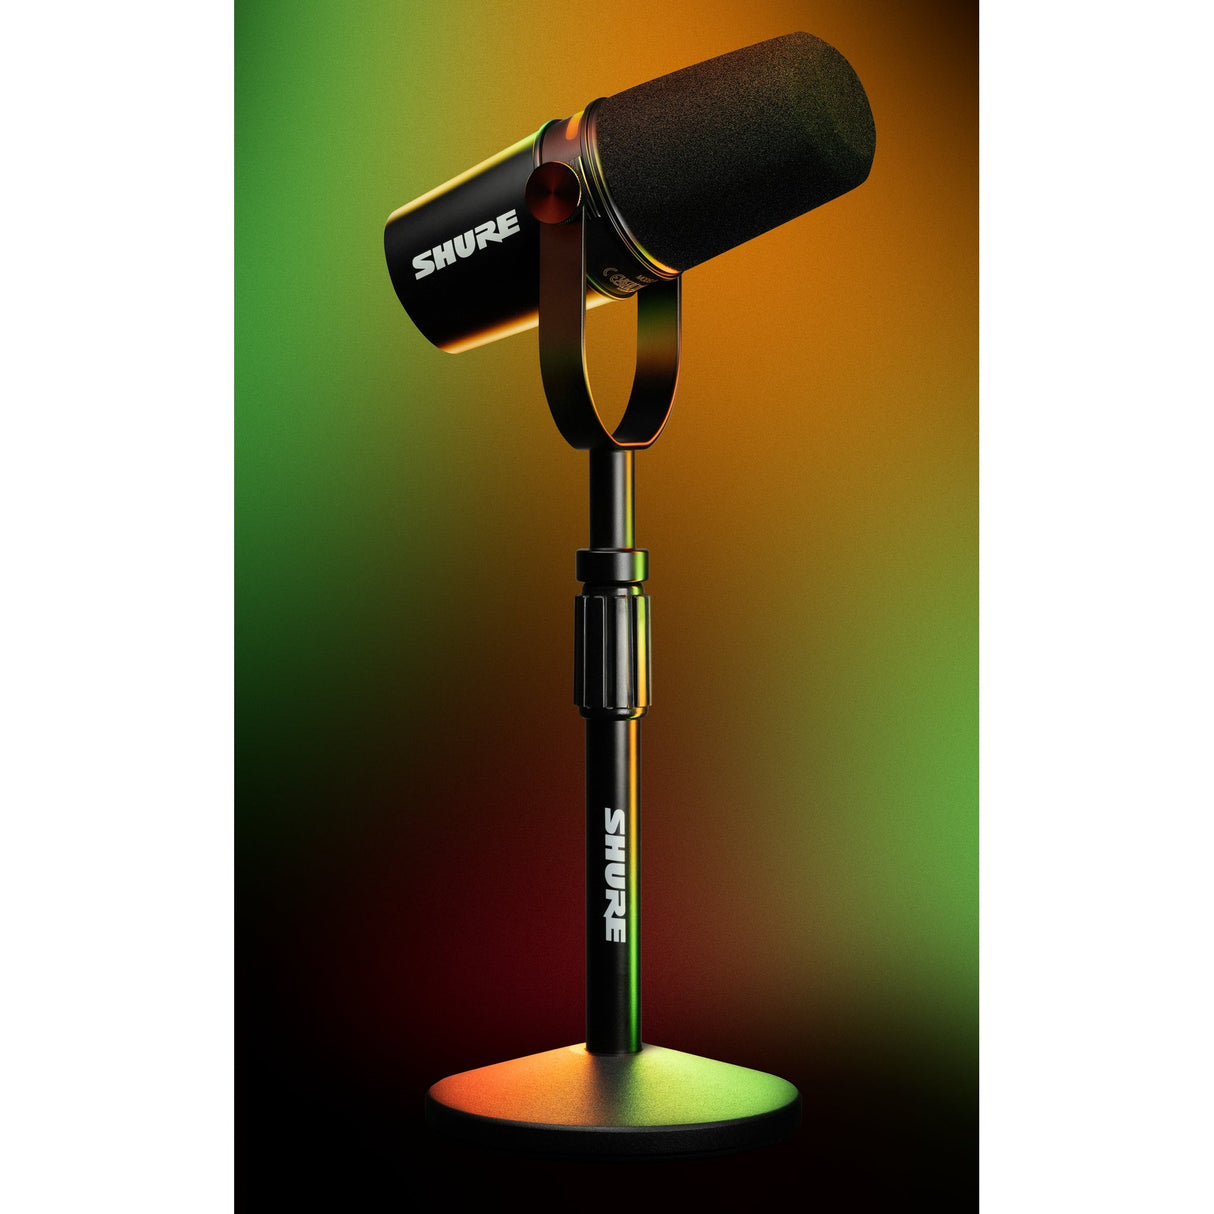 Shure MV7+ Podcast Dynamic Microphone Kit Bundle with Gator Stand